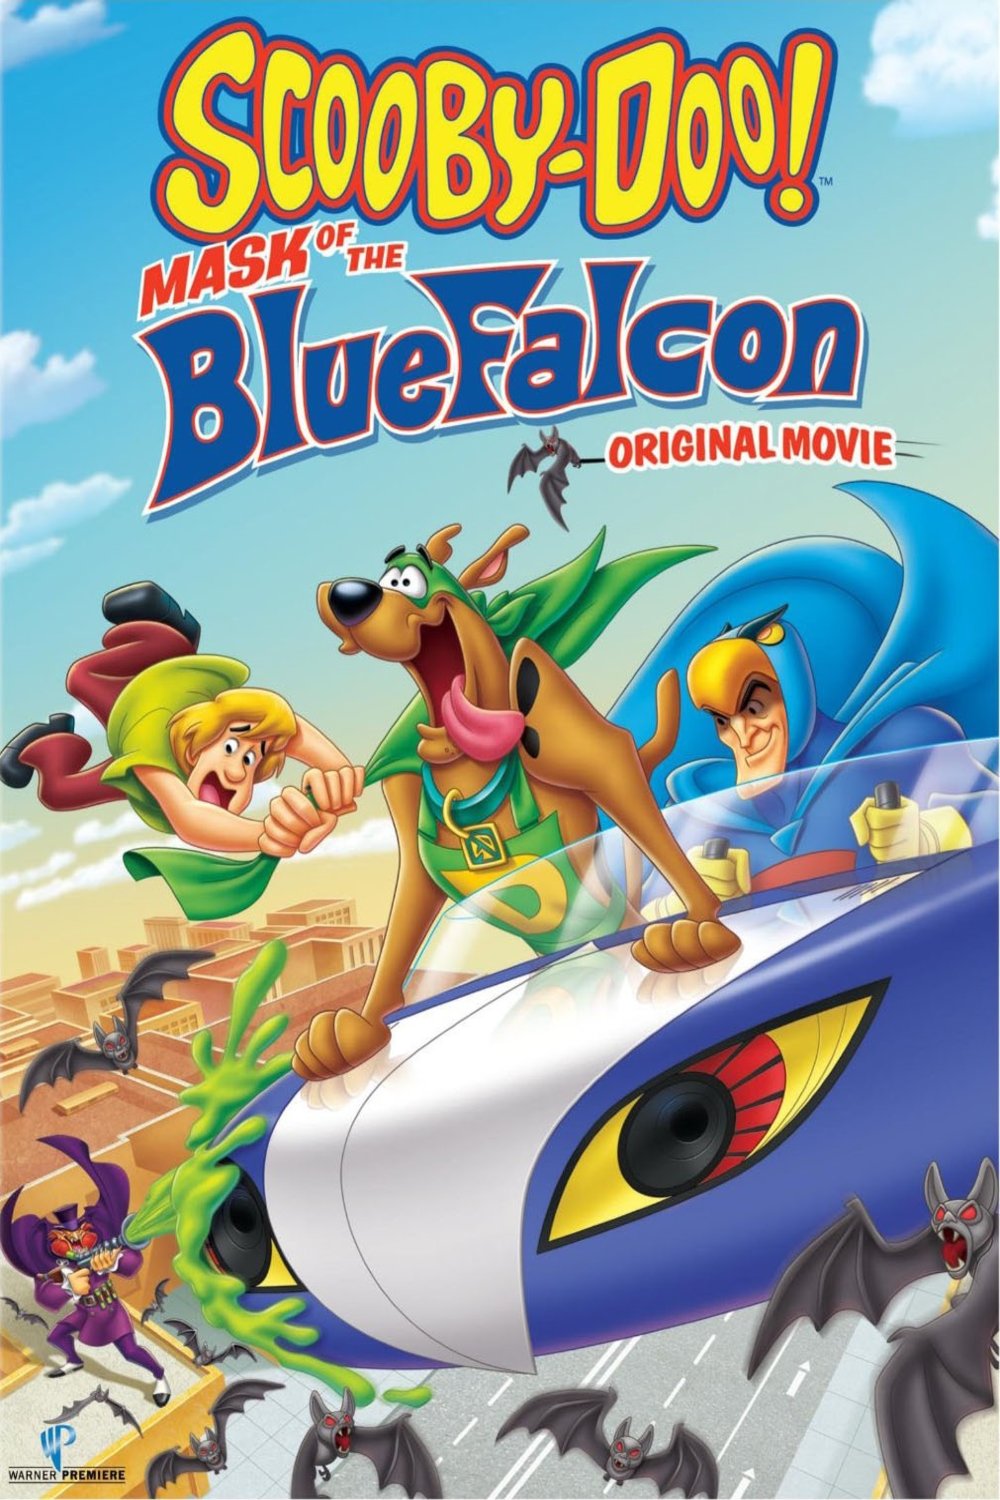 Poster of the movie Scooby-Doo! Mask of the Blue Falcon